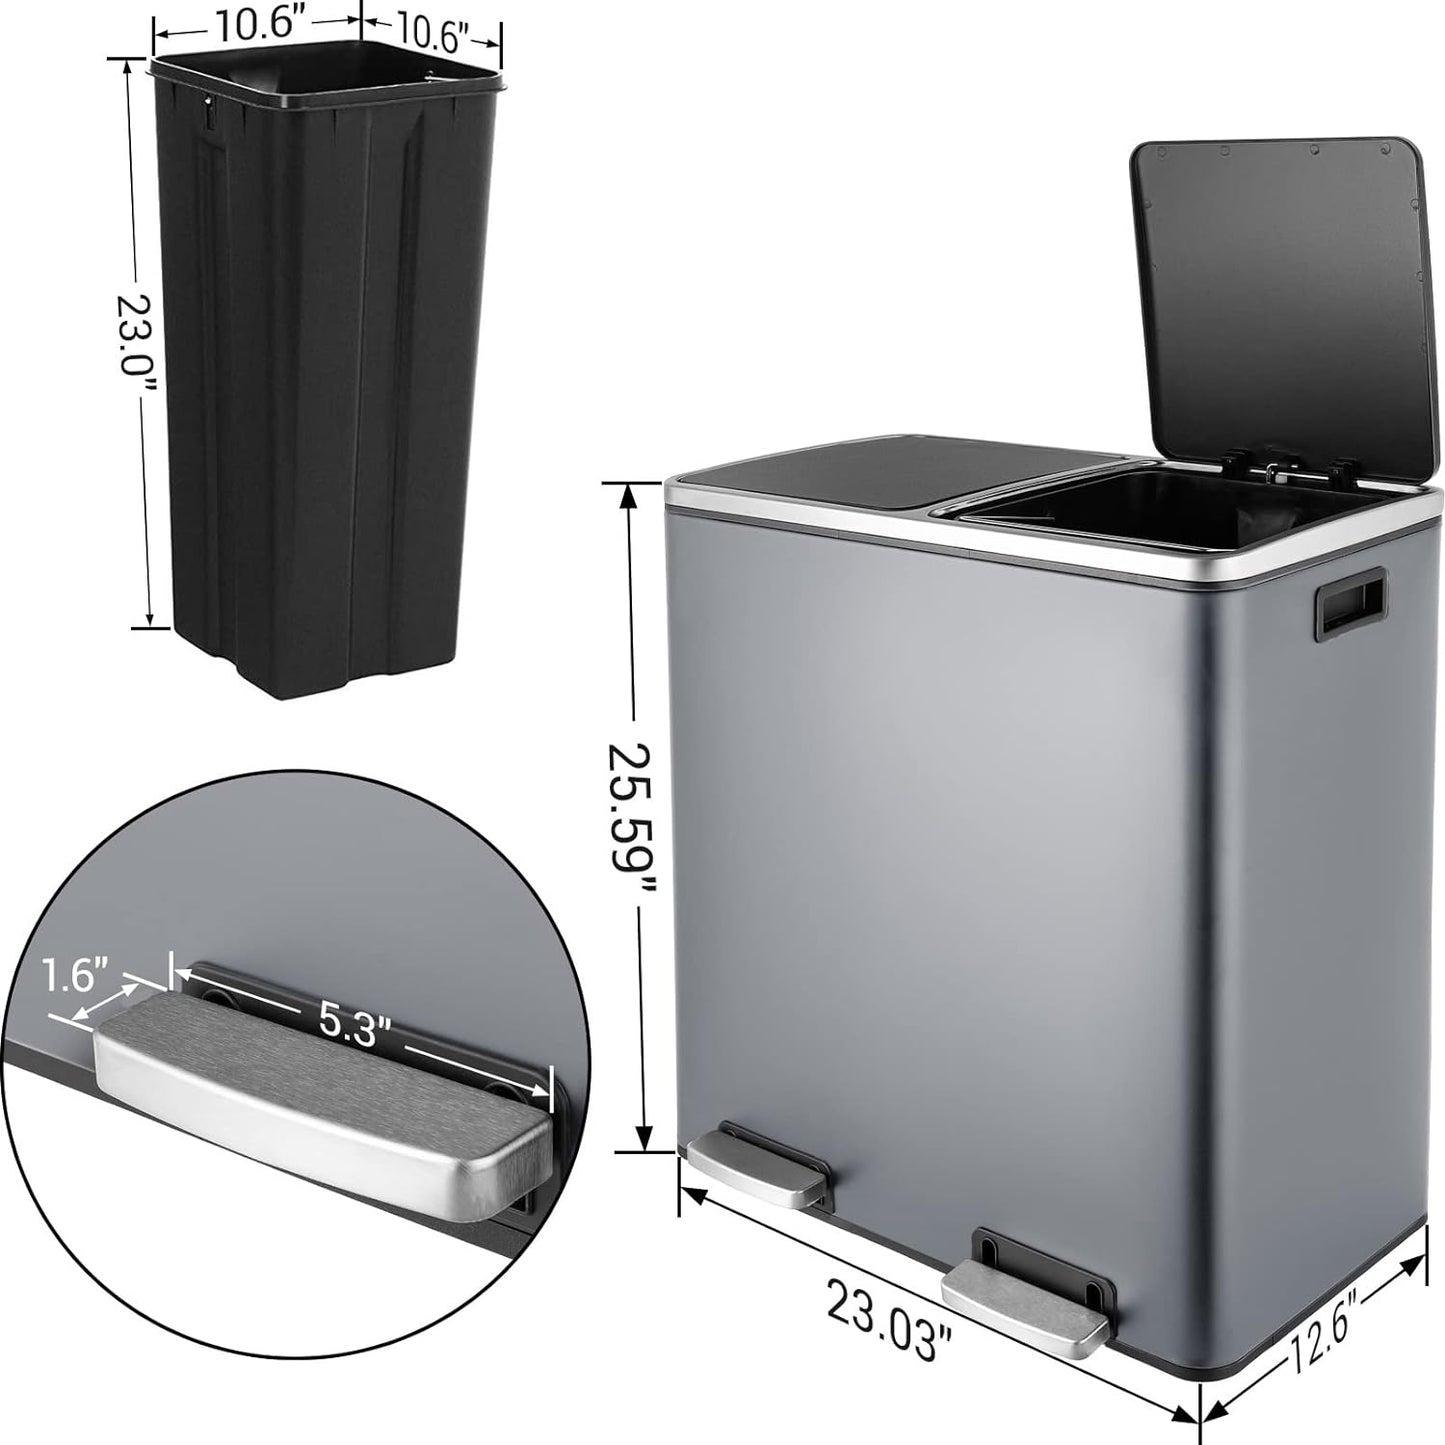 Arlopu 60 Liter / 16 Gal Dual Trash Can, Stainless Steel Kitchen Garbage Can, Double Compartment Classified Rubbish Bin, Recycle Dustbin with Plastic Inner Buckets, Soft-Close Lid